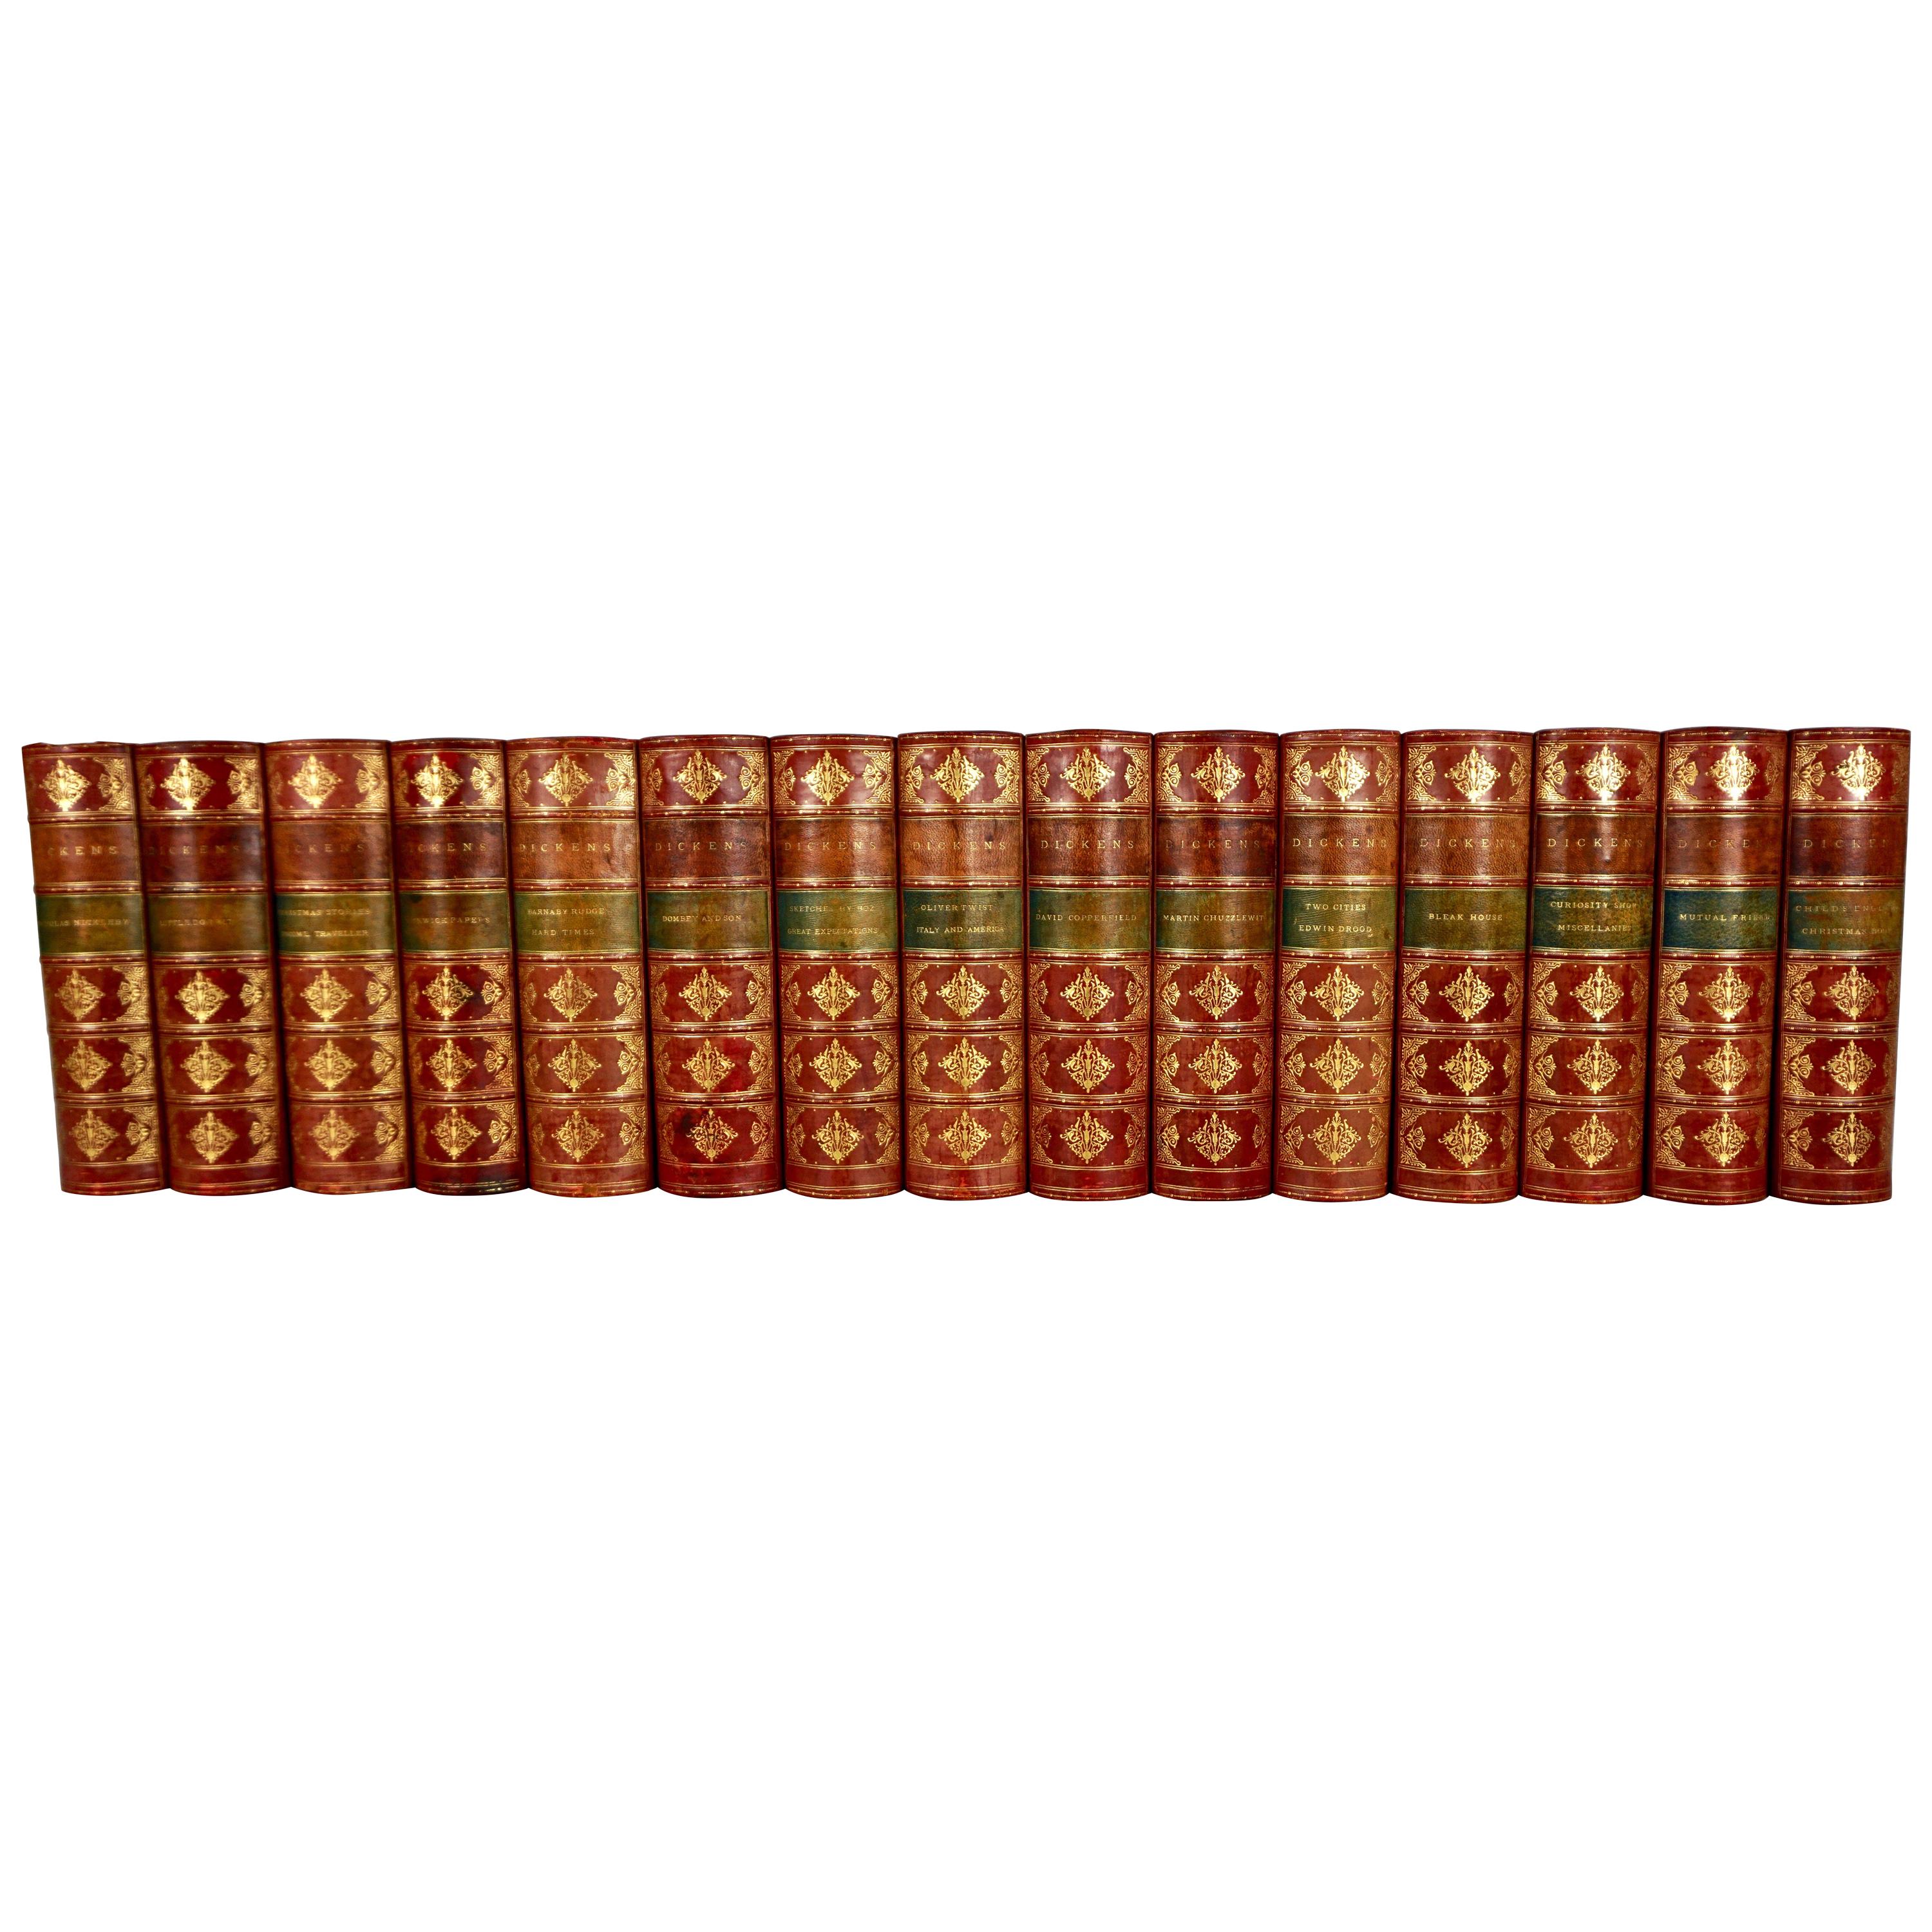 The Complete Works of Charles Dickens Bound in Red Leather and Marbleized Paper